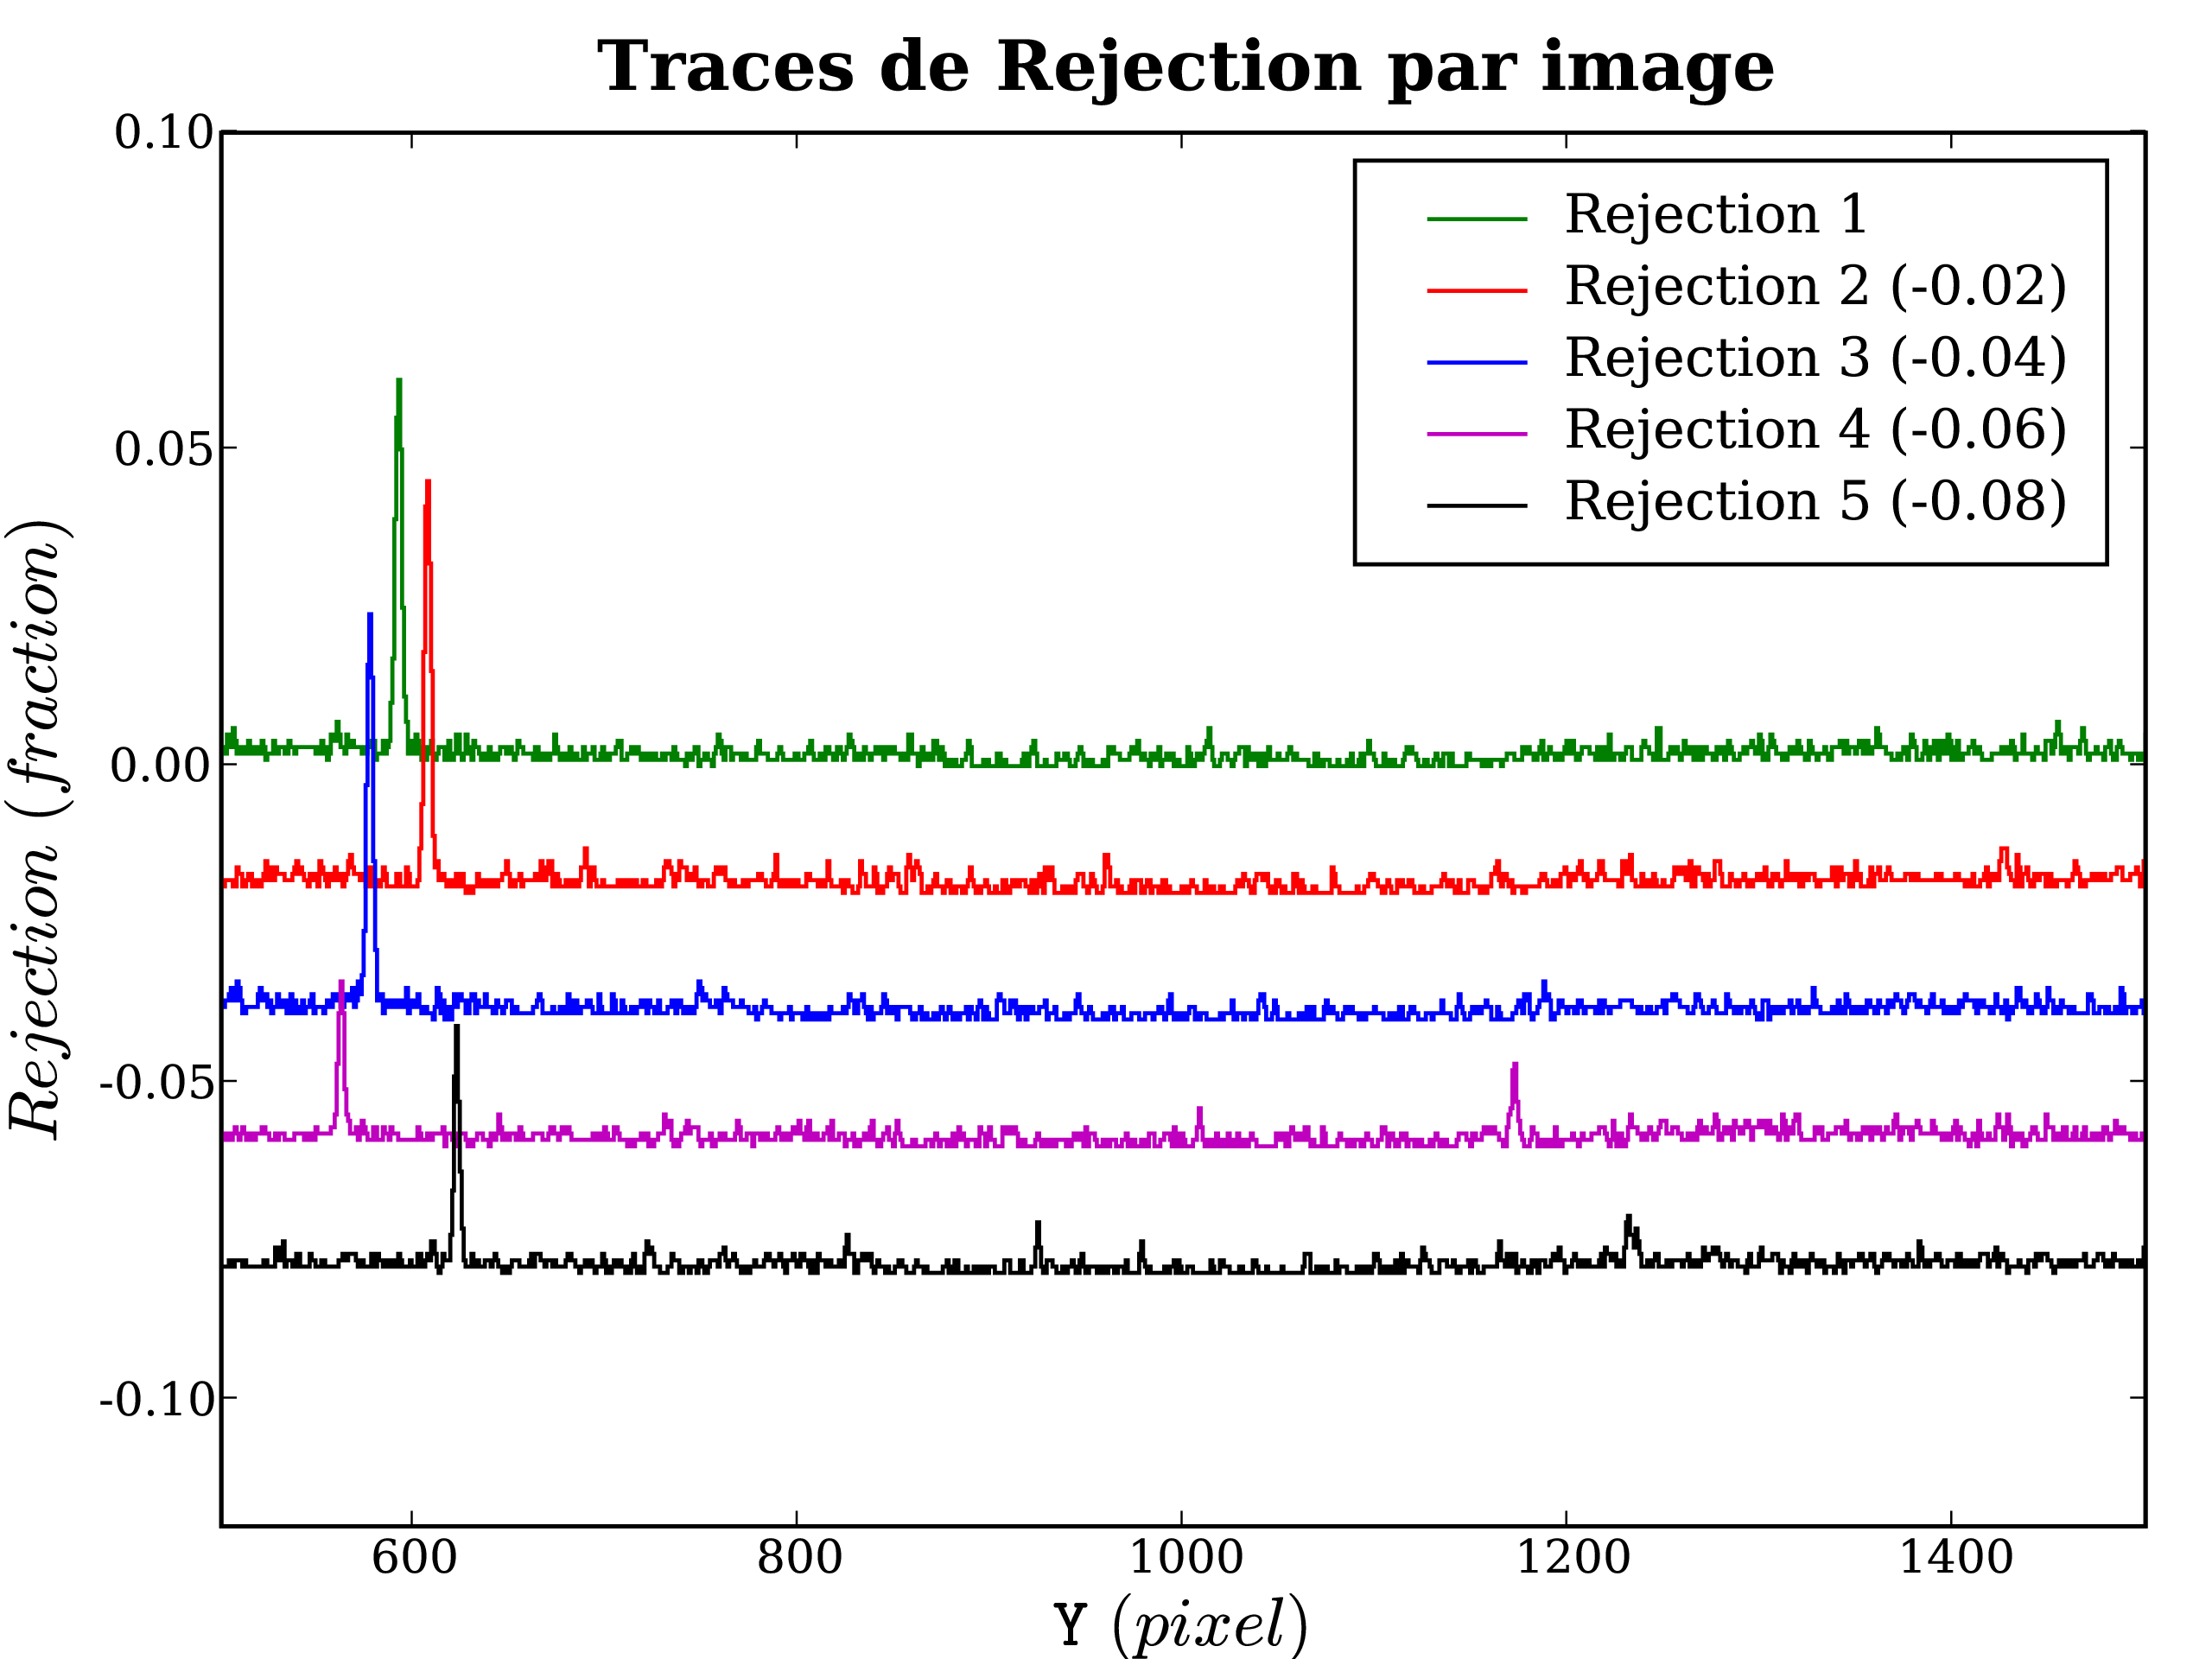 Image Reject_Trace